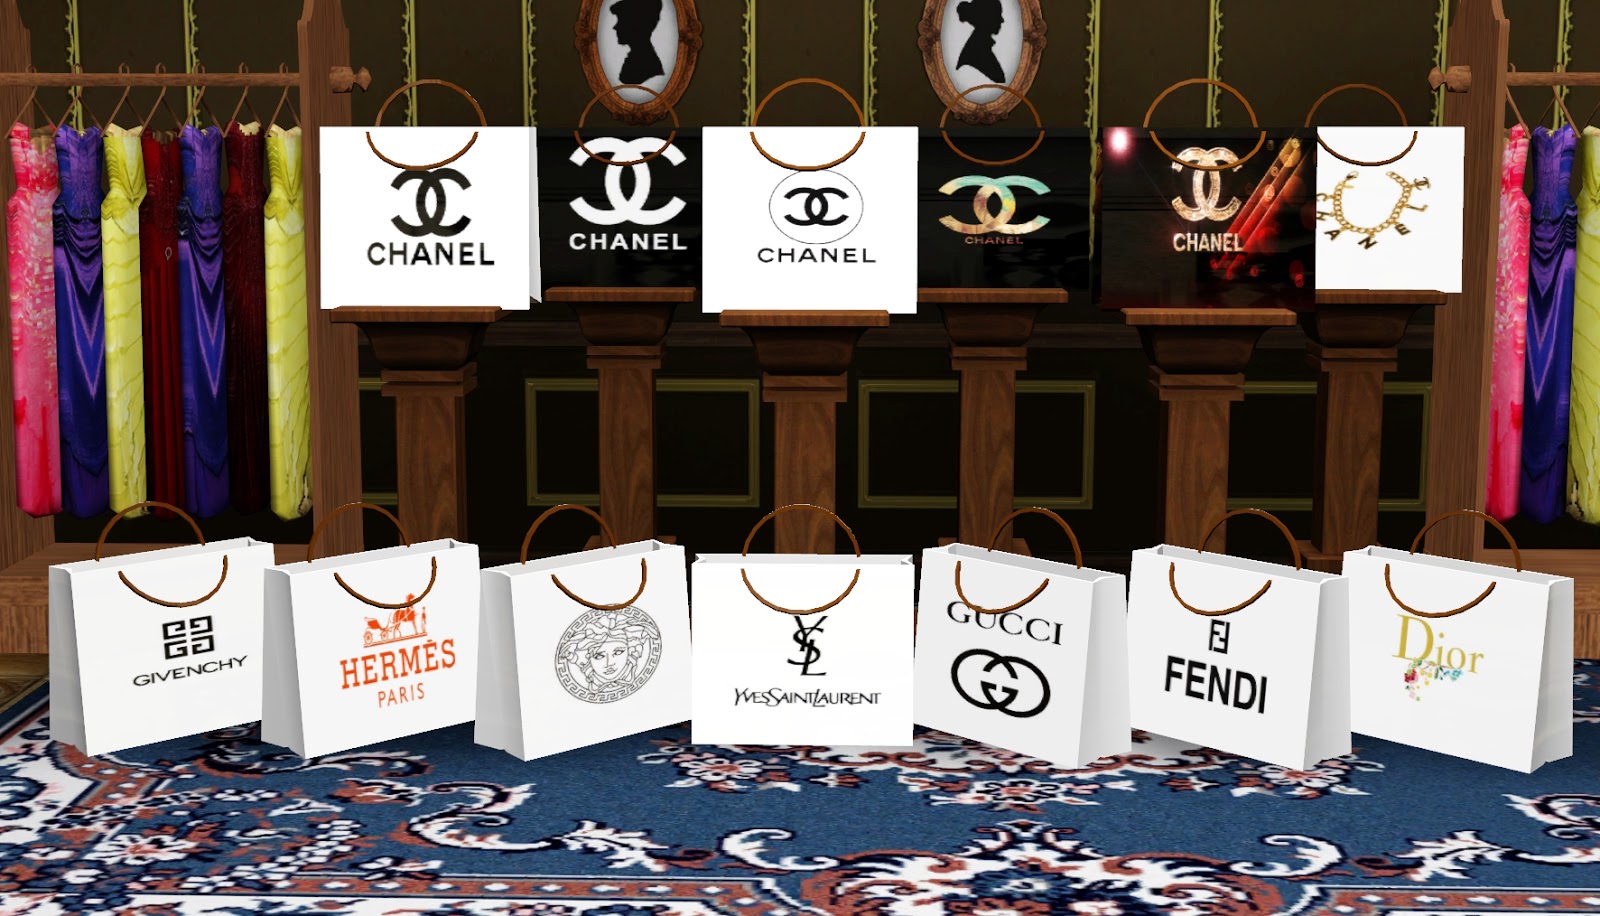 My Sims 3 Blog: Stylish Shopping bags by Ladesire